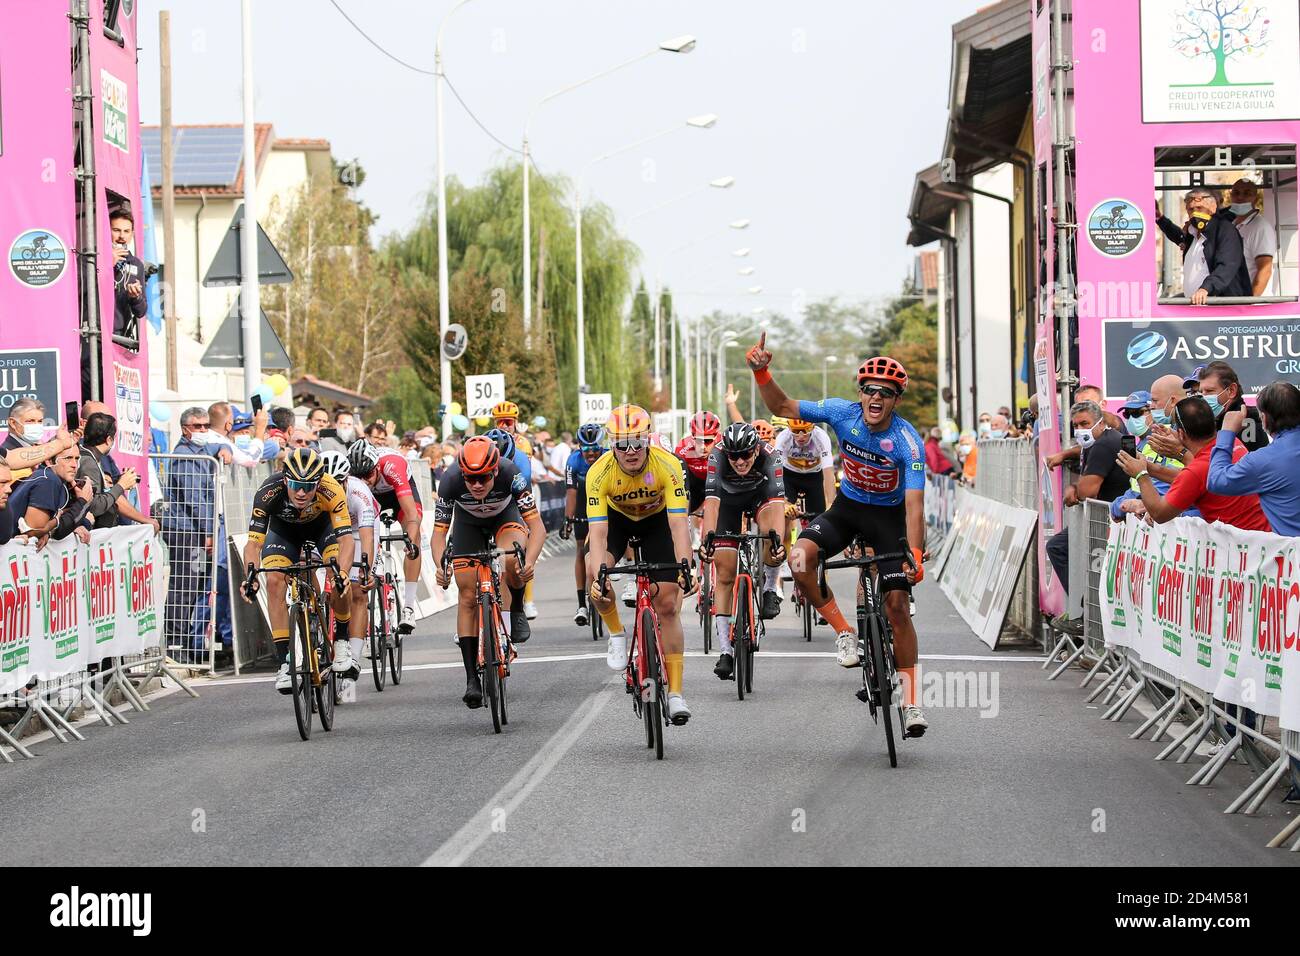 San Marco Di Mereto Di Tomba, Italy. 9th Oct, 2020. san marco di mereto di tomba, Italy, 09 Oct 2020, The winner of second stages Szymon Krawczyk - CCC Development Team during Under 23 Elite - in line race Ã¢â‚¬' Road Race Variano Ã¢â‚¬' San Marco di Mereto di Tomba - Street Cycling - Credit: LM/Luca Tedeschi Credit: Luca Tedeschi/LPS/ZUMA Wire/Alamy Live News Stock Photo